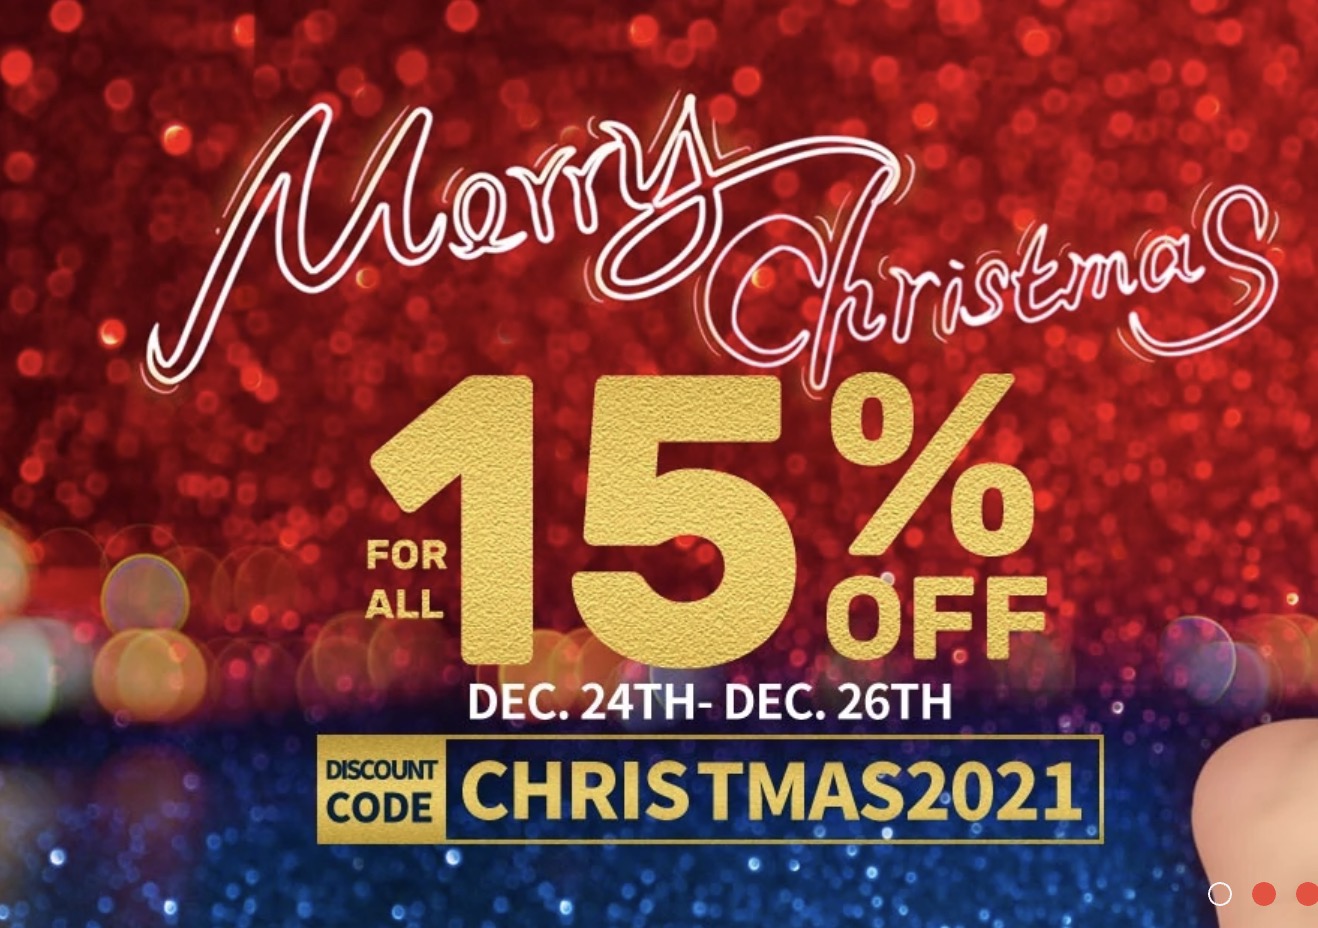 tantaly 15% off discount code for Christmas